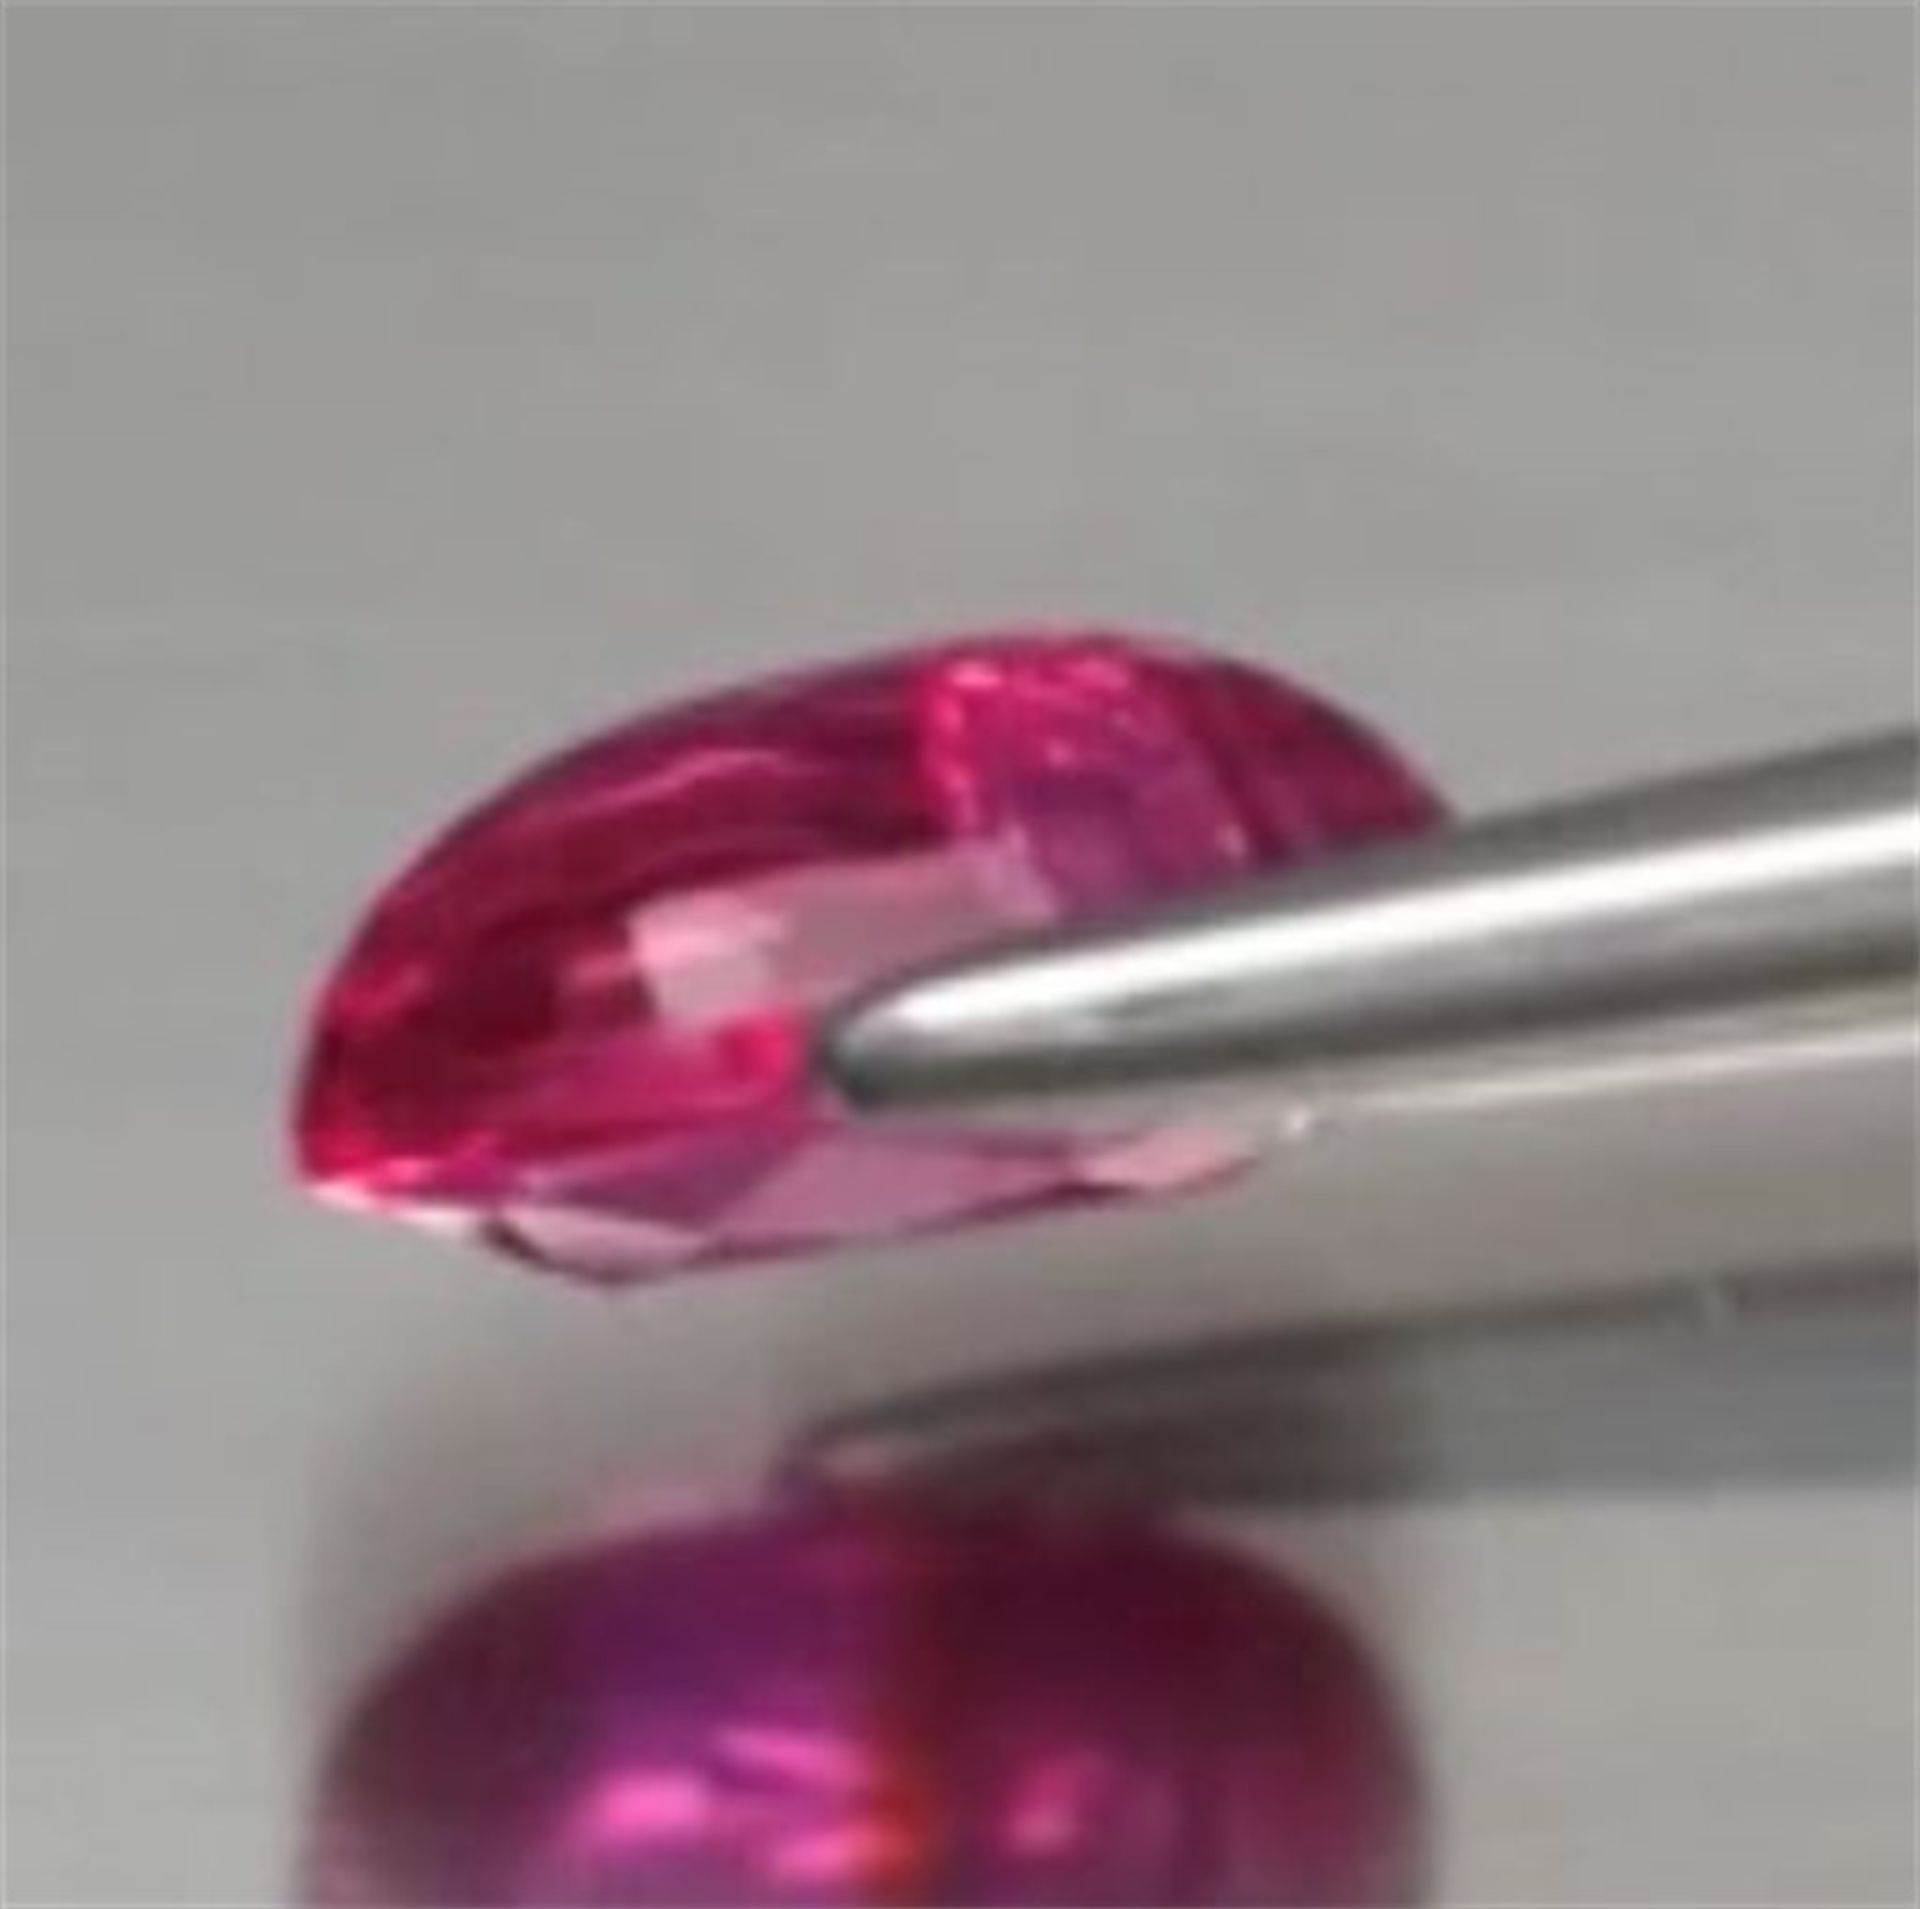 LOTUS Certified 0.99 ct. Hot Pink Sapphire MOZAMBIQUE - Image 9 of 10